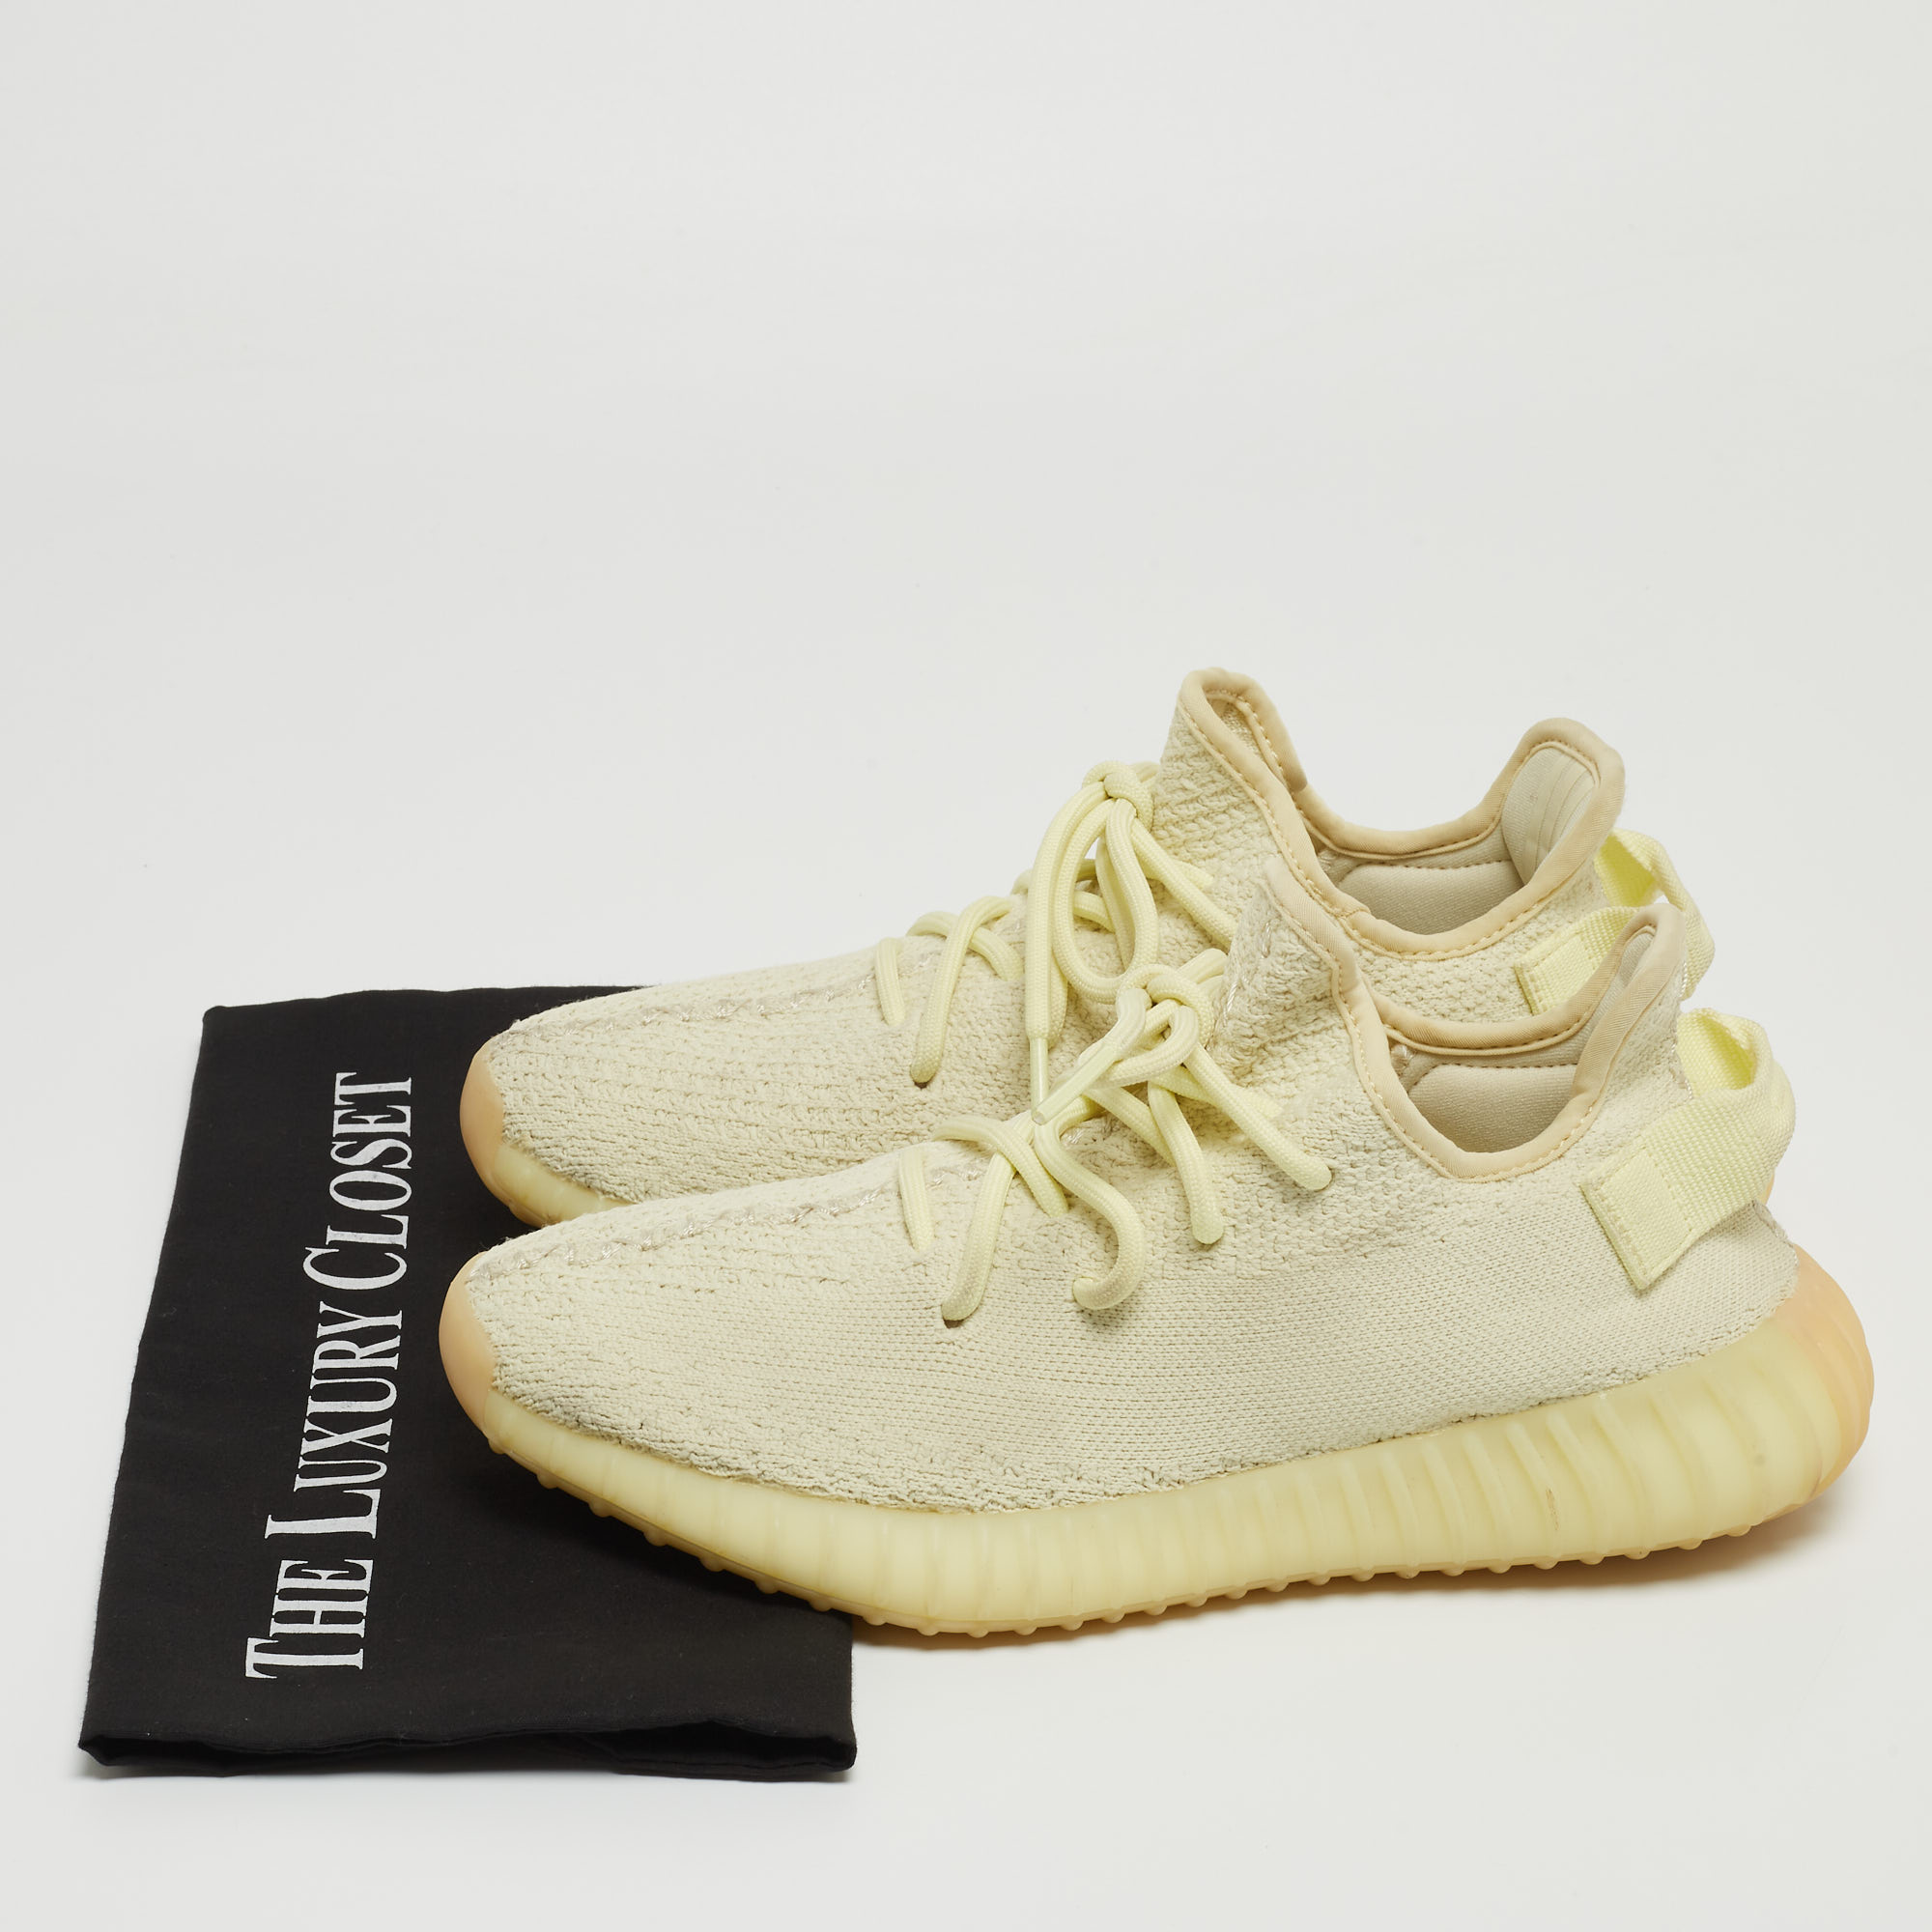 Yeezy X Adidas Light Yellow Knit Fabric Boost 350 V2 Butter Sneakers Size 39 1/3